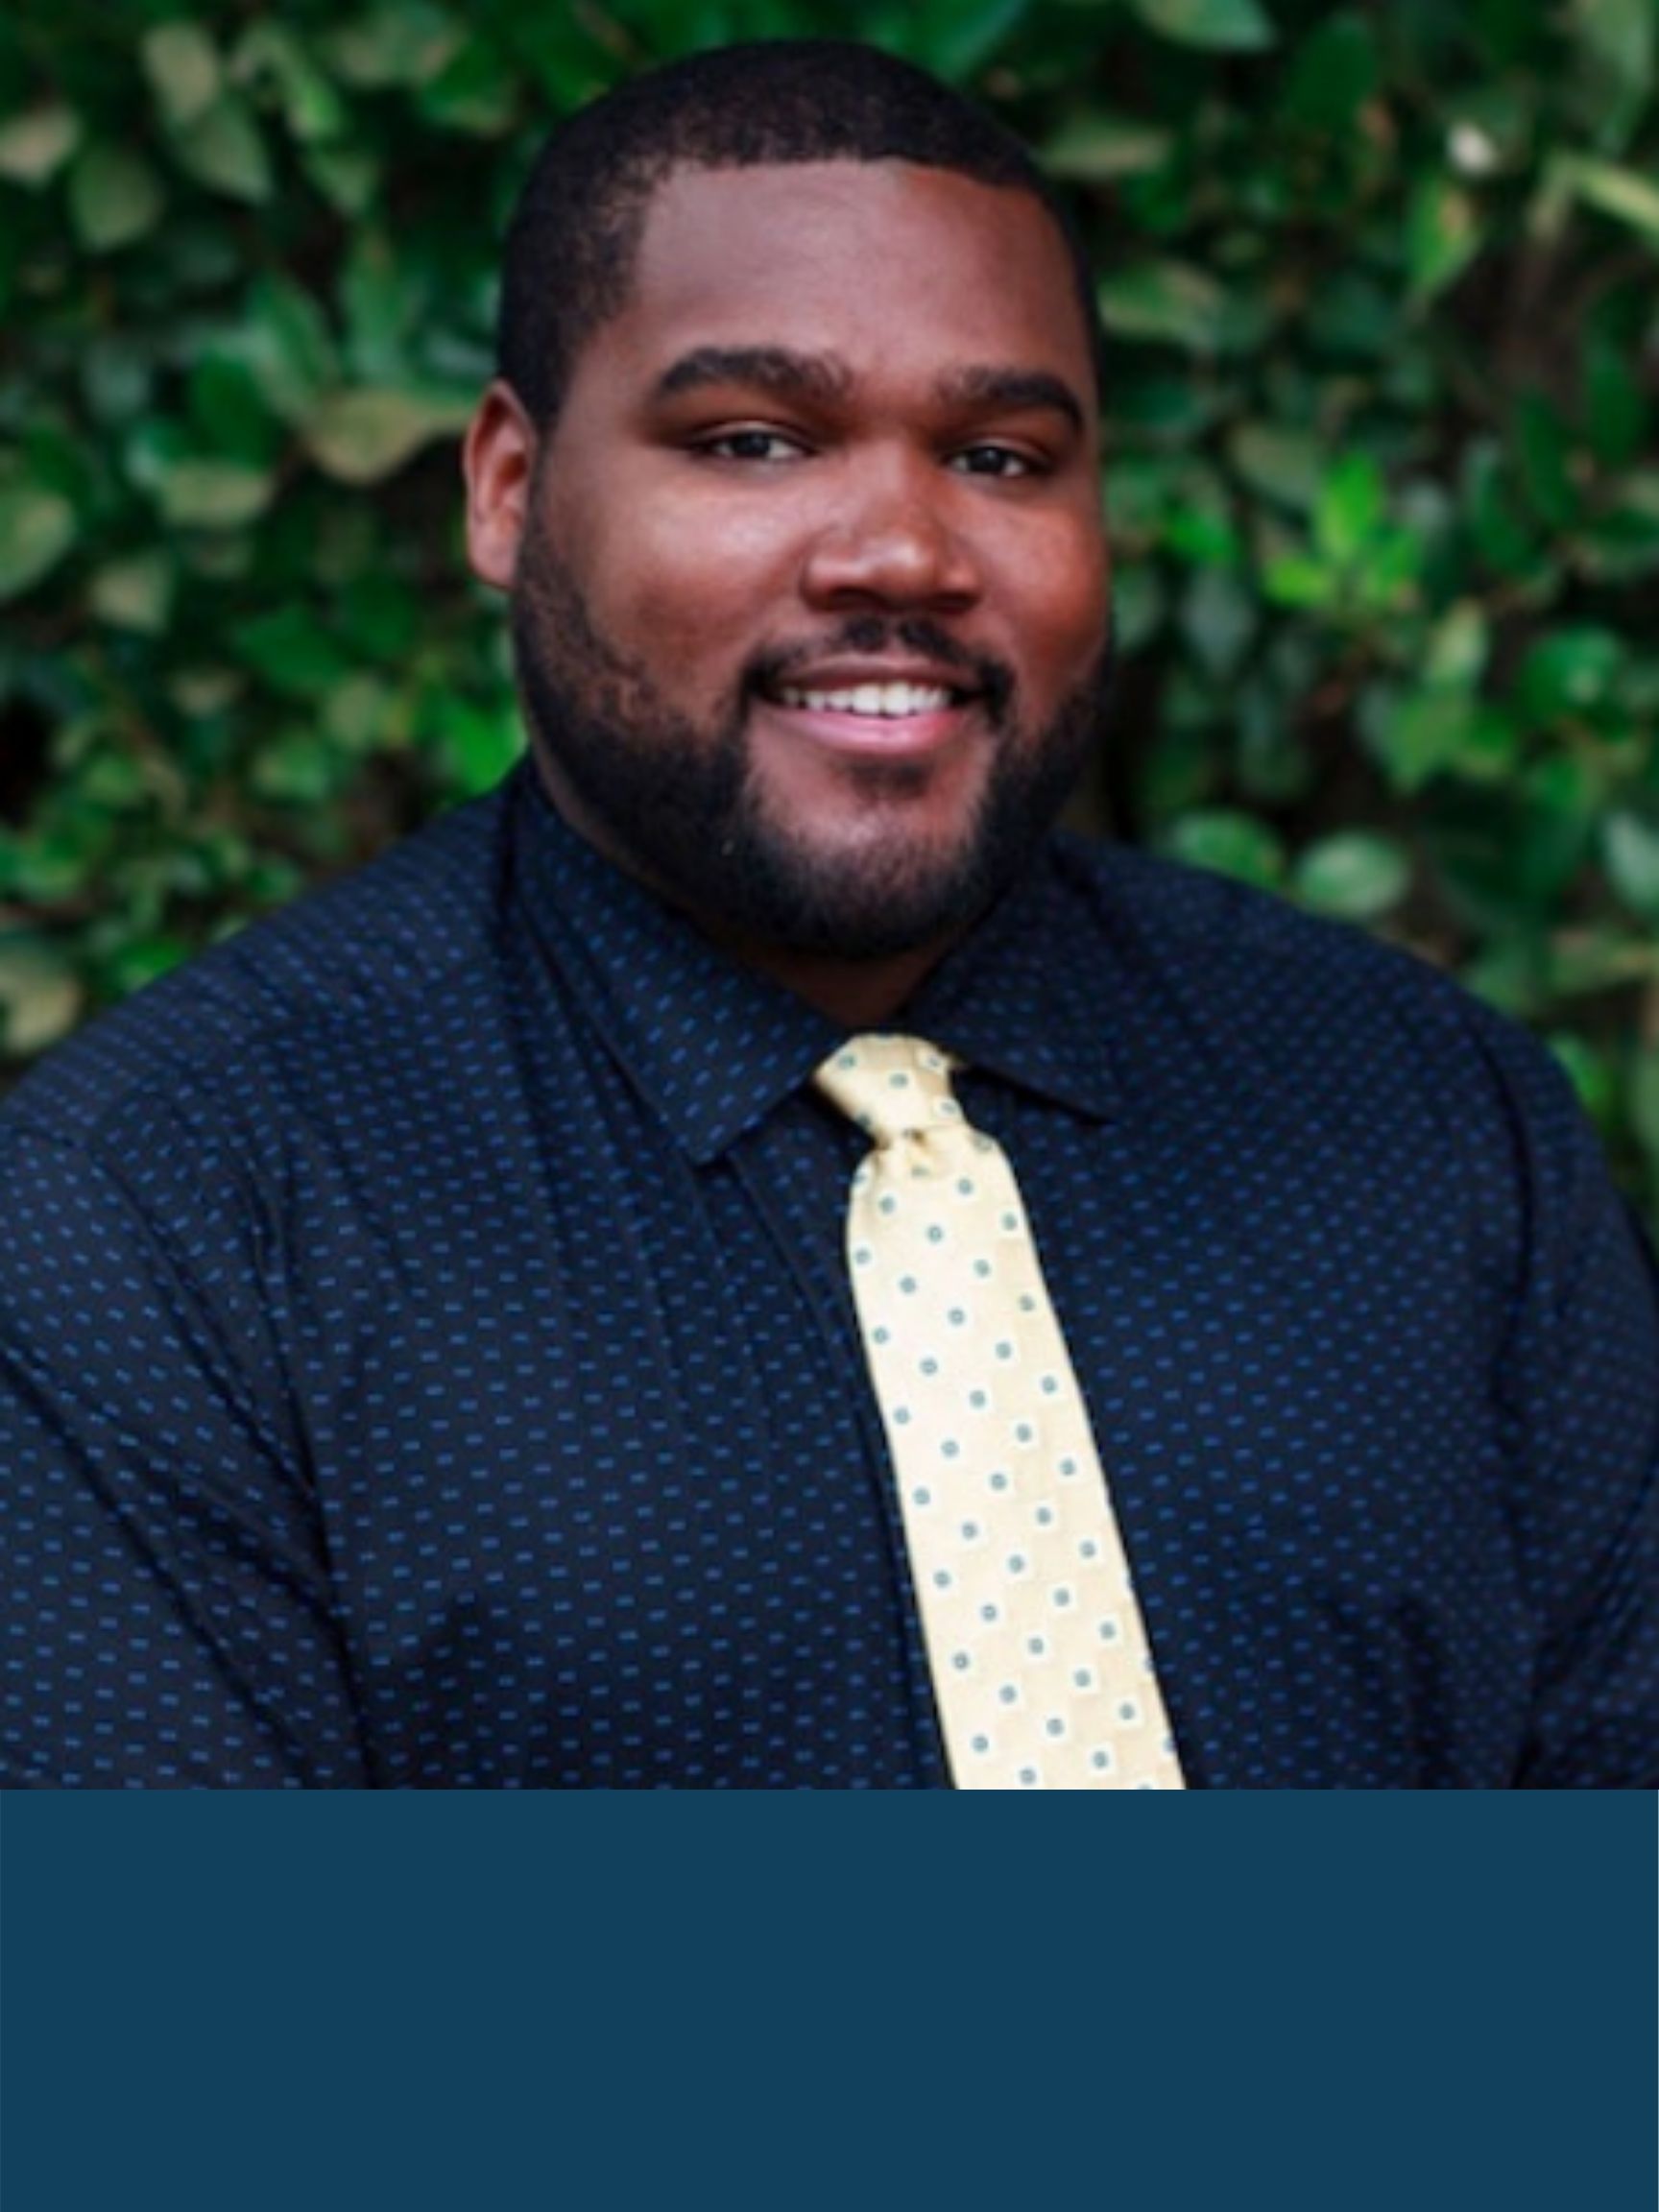 A formal portrait of Jevon Wilkes, Executive Director of California Coalition for Youth, wearing a button down shirt and yellow tie